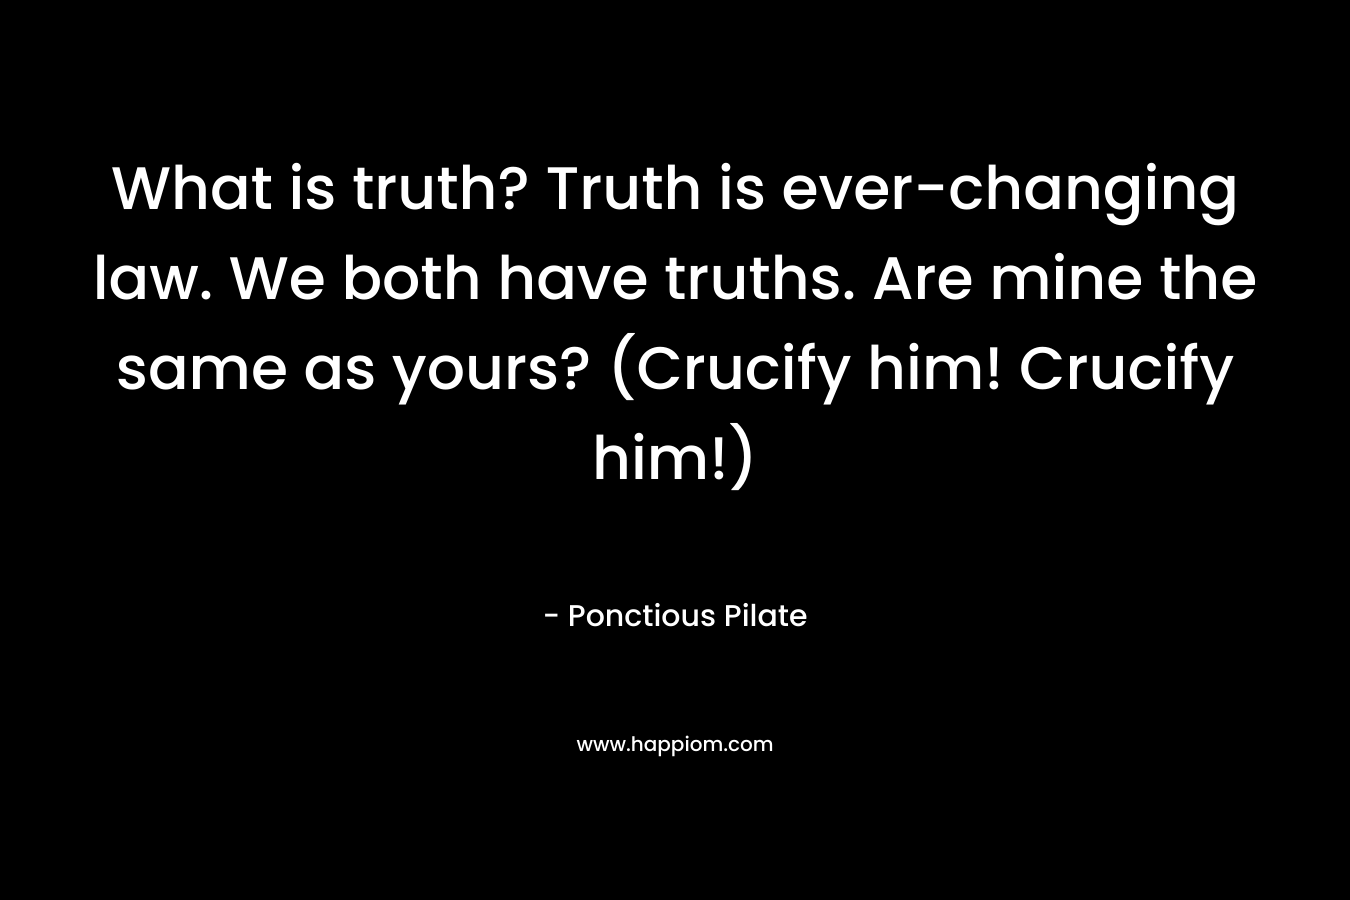 What is truth? Truth is ever-changing law. We both have truths. Are mine the same as yours? (Crucify him! Crucify him!)